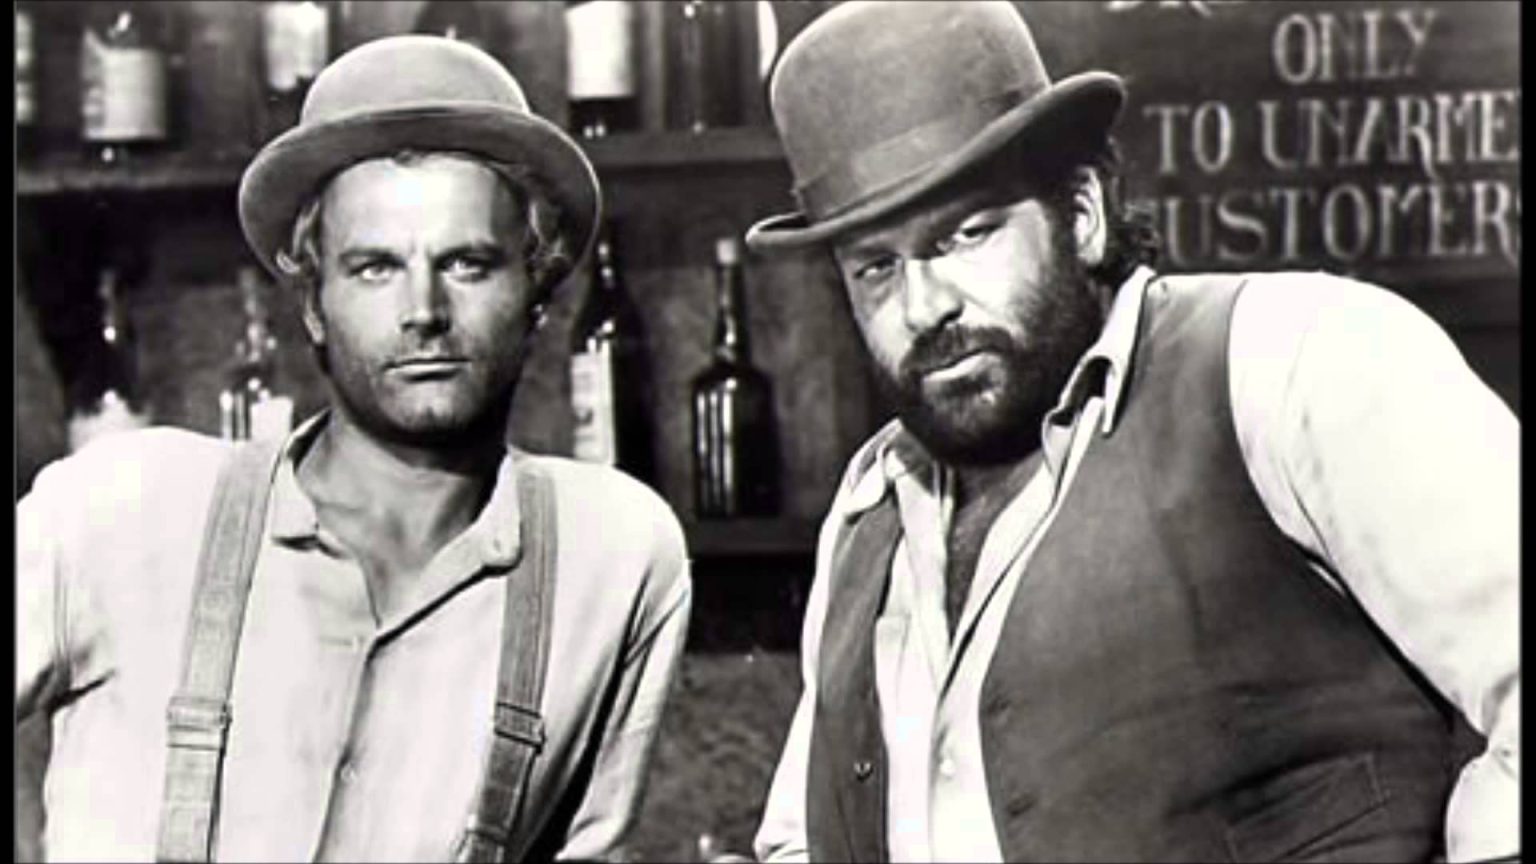 bud spencer & terence hill slap and beans generacionxbox